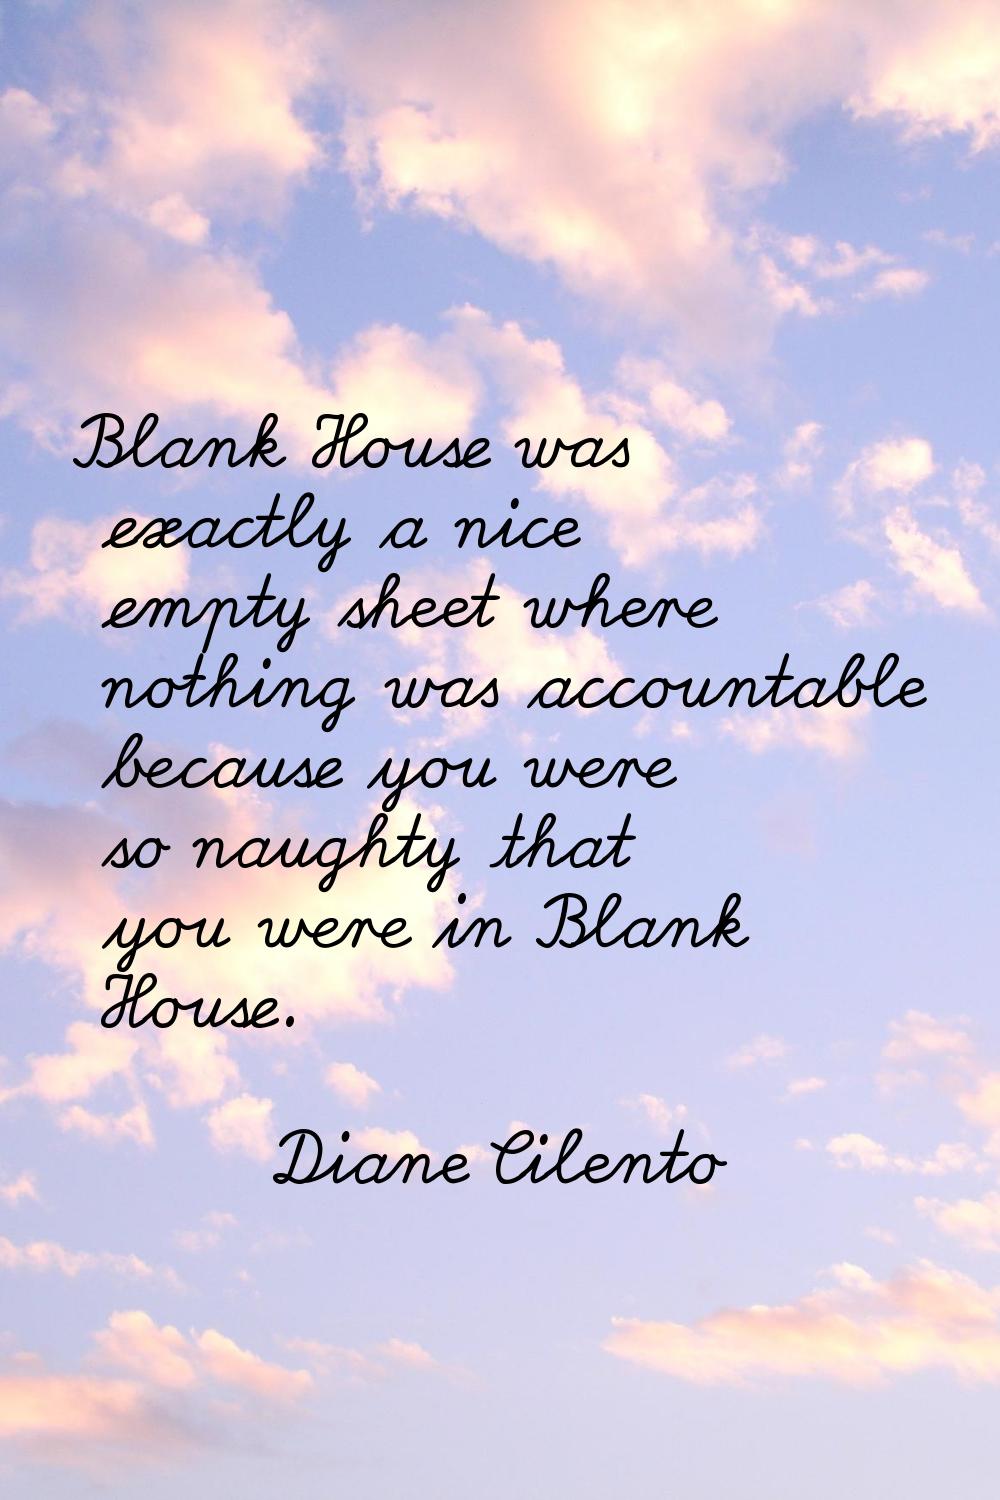 Blank House was exactly a nice empty sheet where nothing was accountable because you were so naught